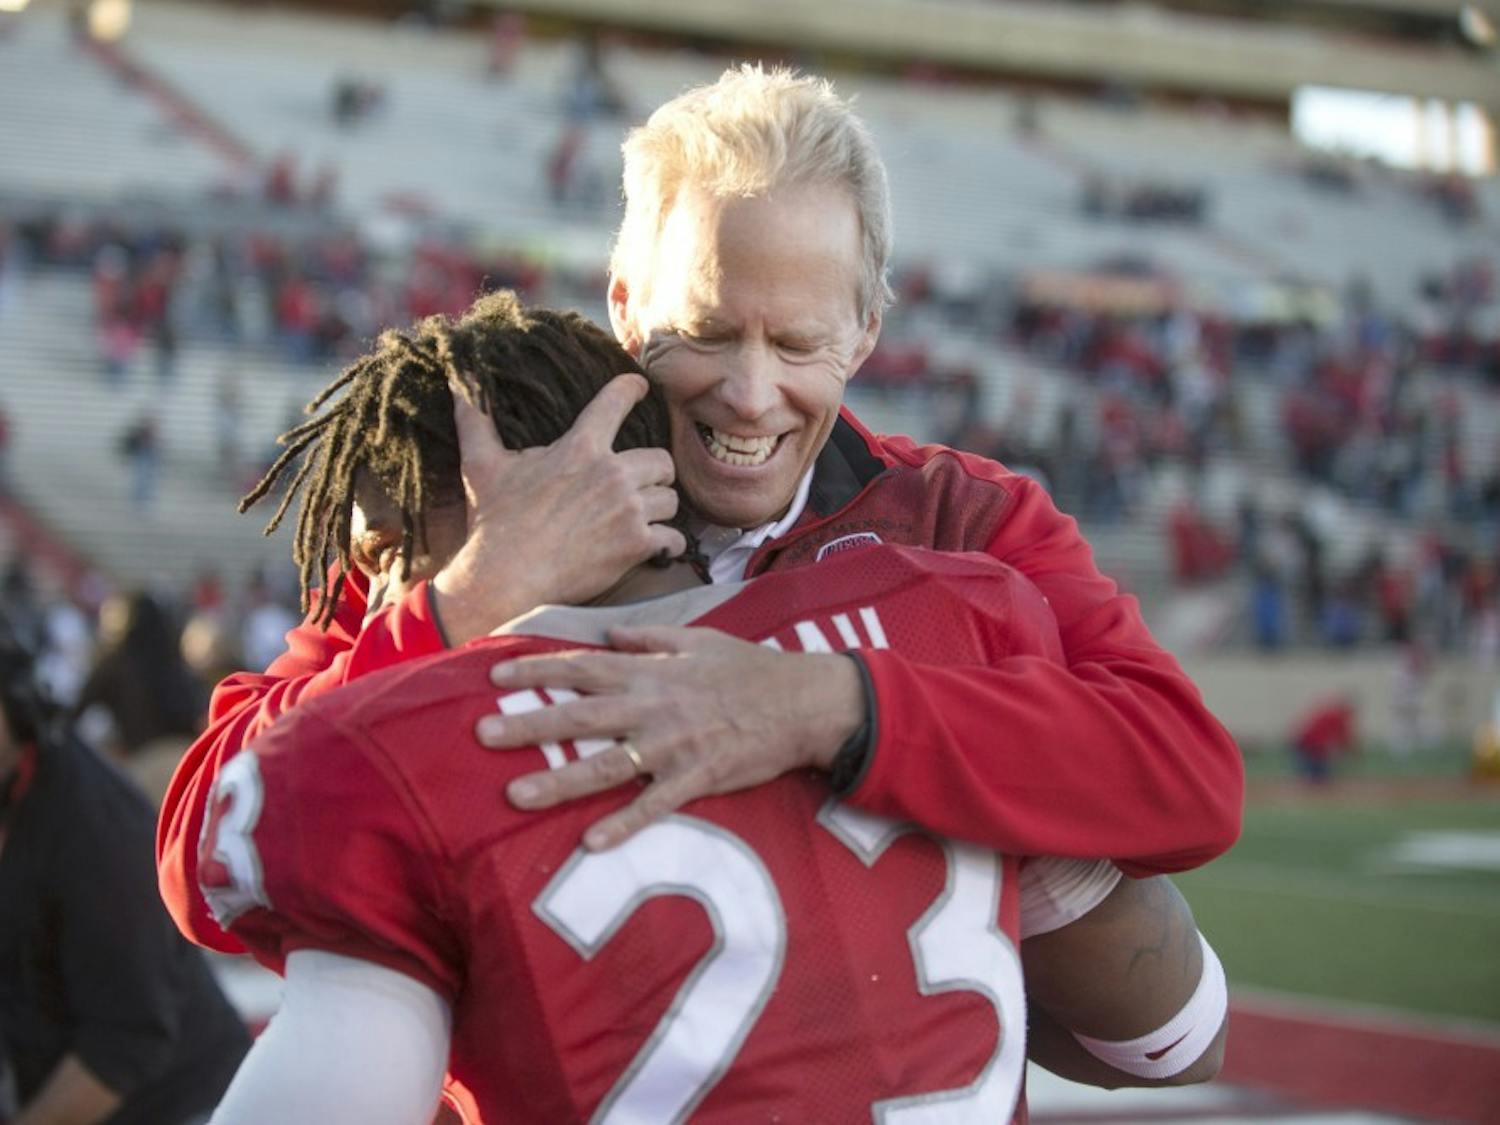 New Mexico football head coach Bob Davie embraces senior safety Devonta Tabannah after the final home game against Wyoming on Saturday. The Lobos defeated the Cowboys 36-30, its first home victory of the season.